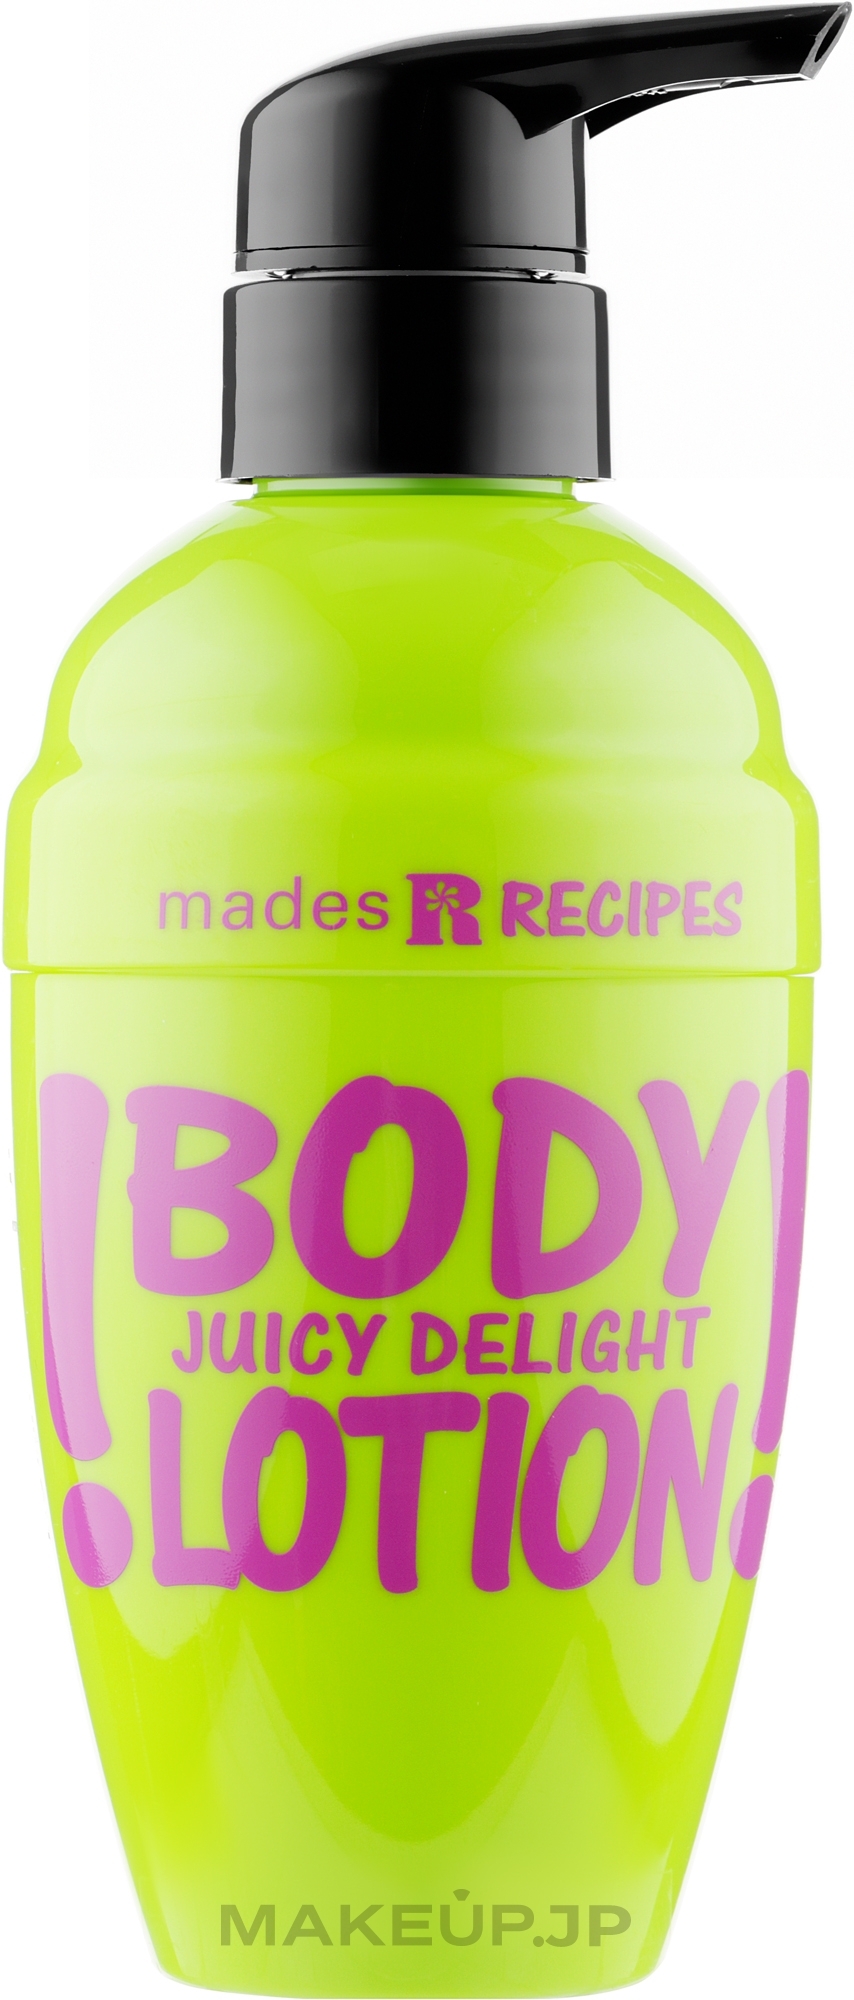 Juicy Delight Body Lotion - Mades Cosmetics Recipes Juicy Delight Body Lotion — photo 350 ml